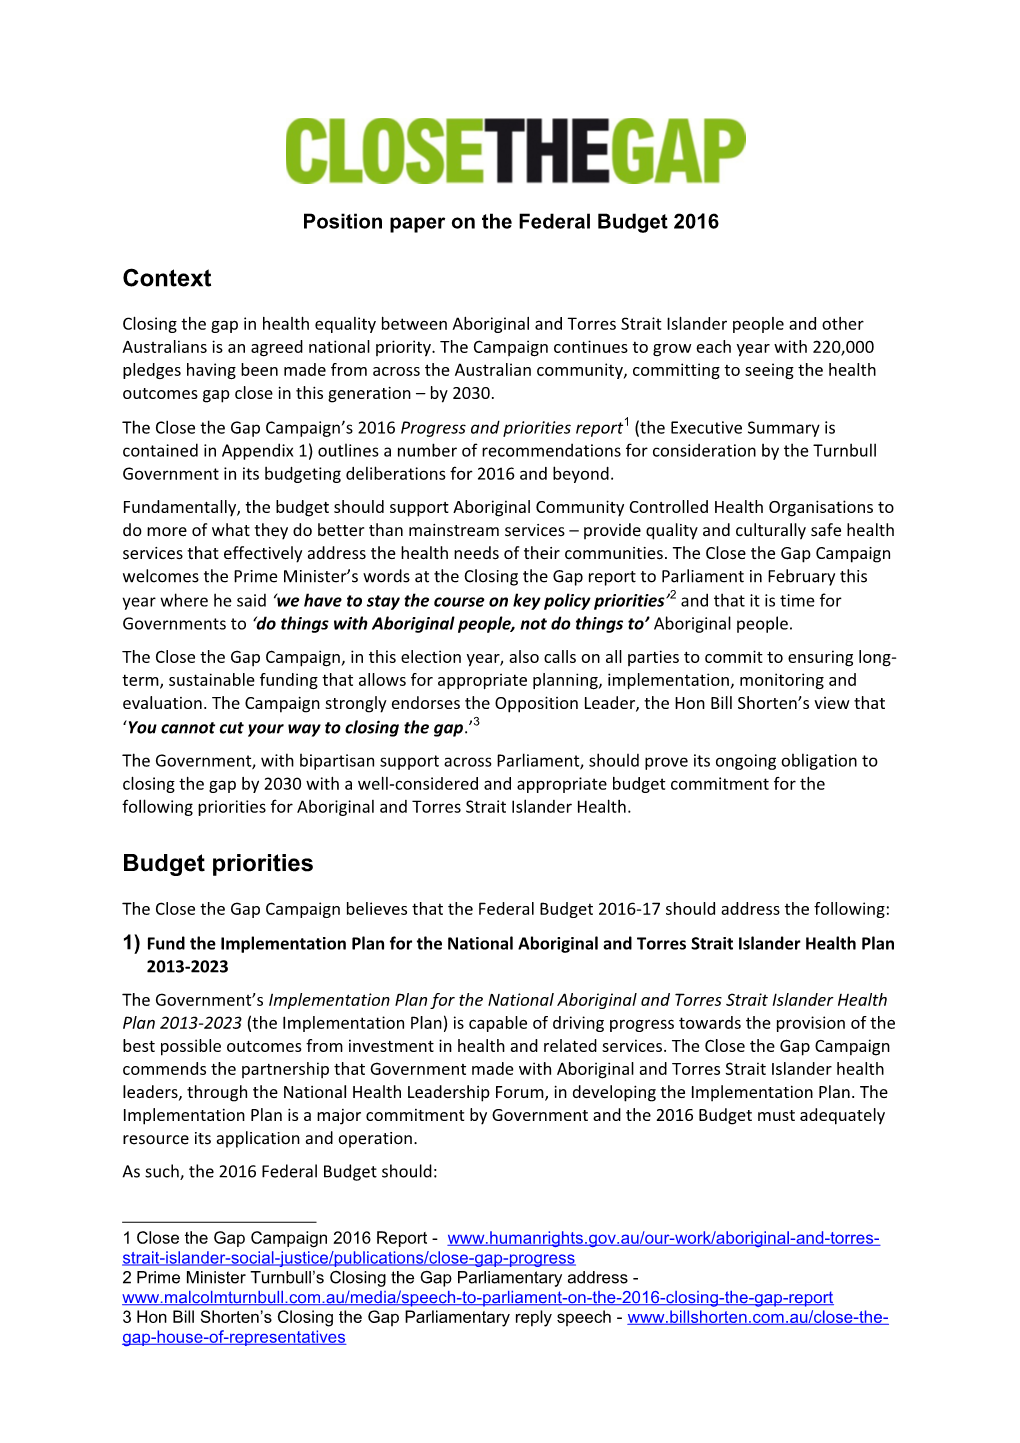 Position Paper on the Federal Budget 2016